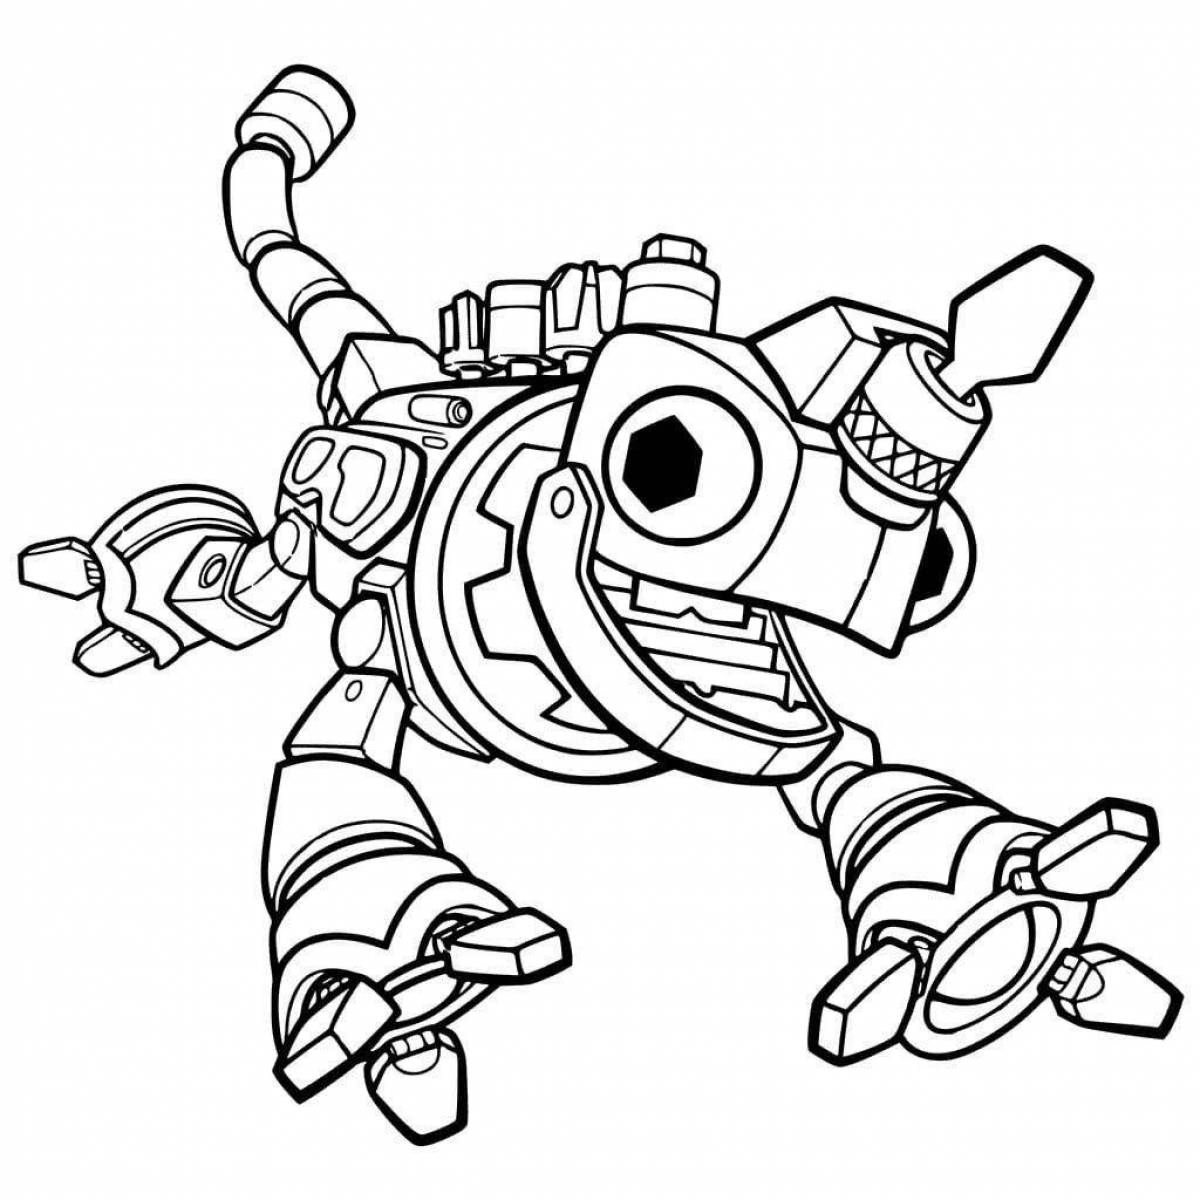 Exquisite screamers coloring pages for boys